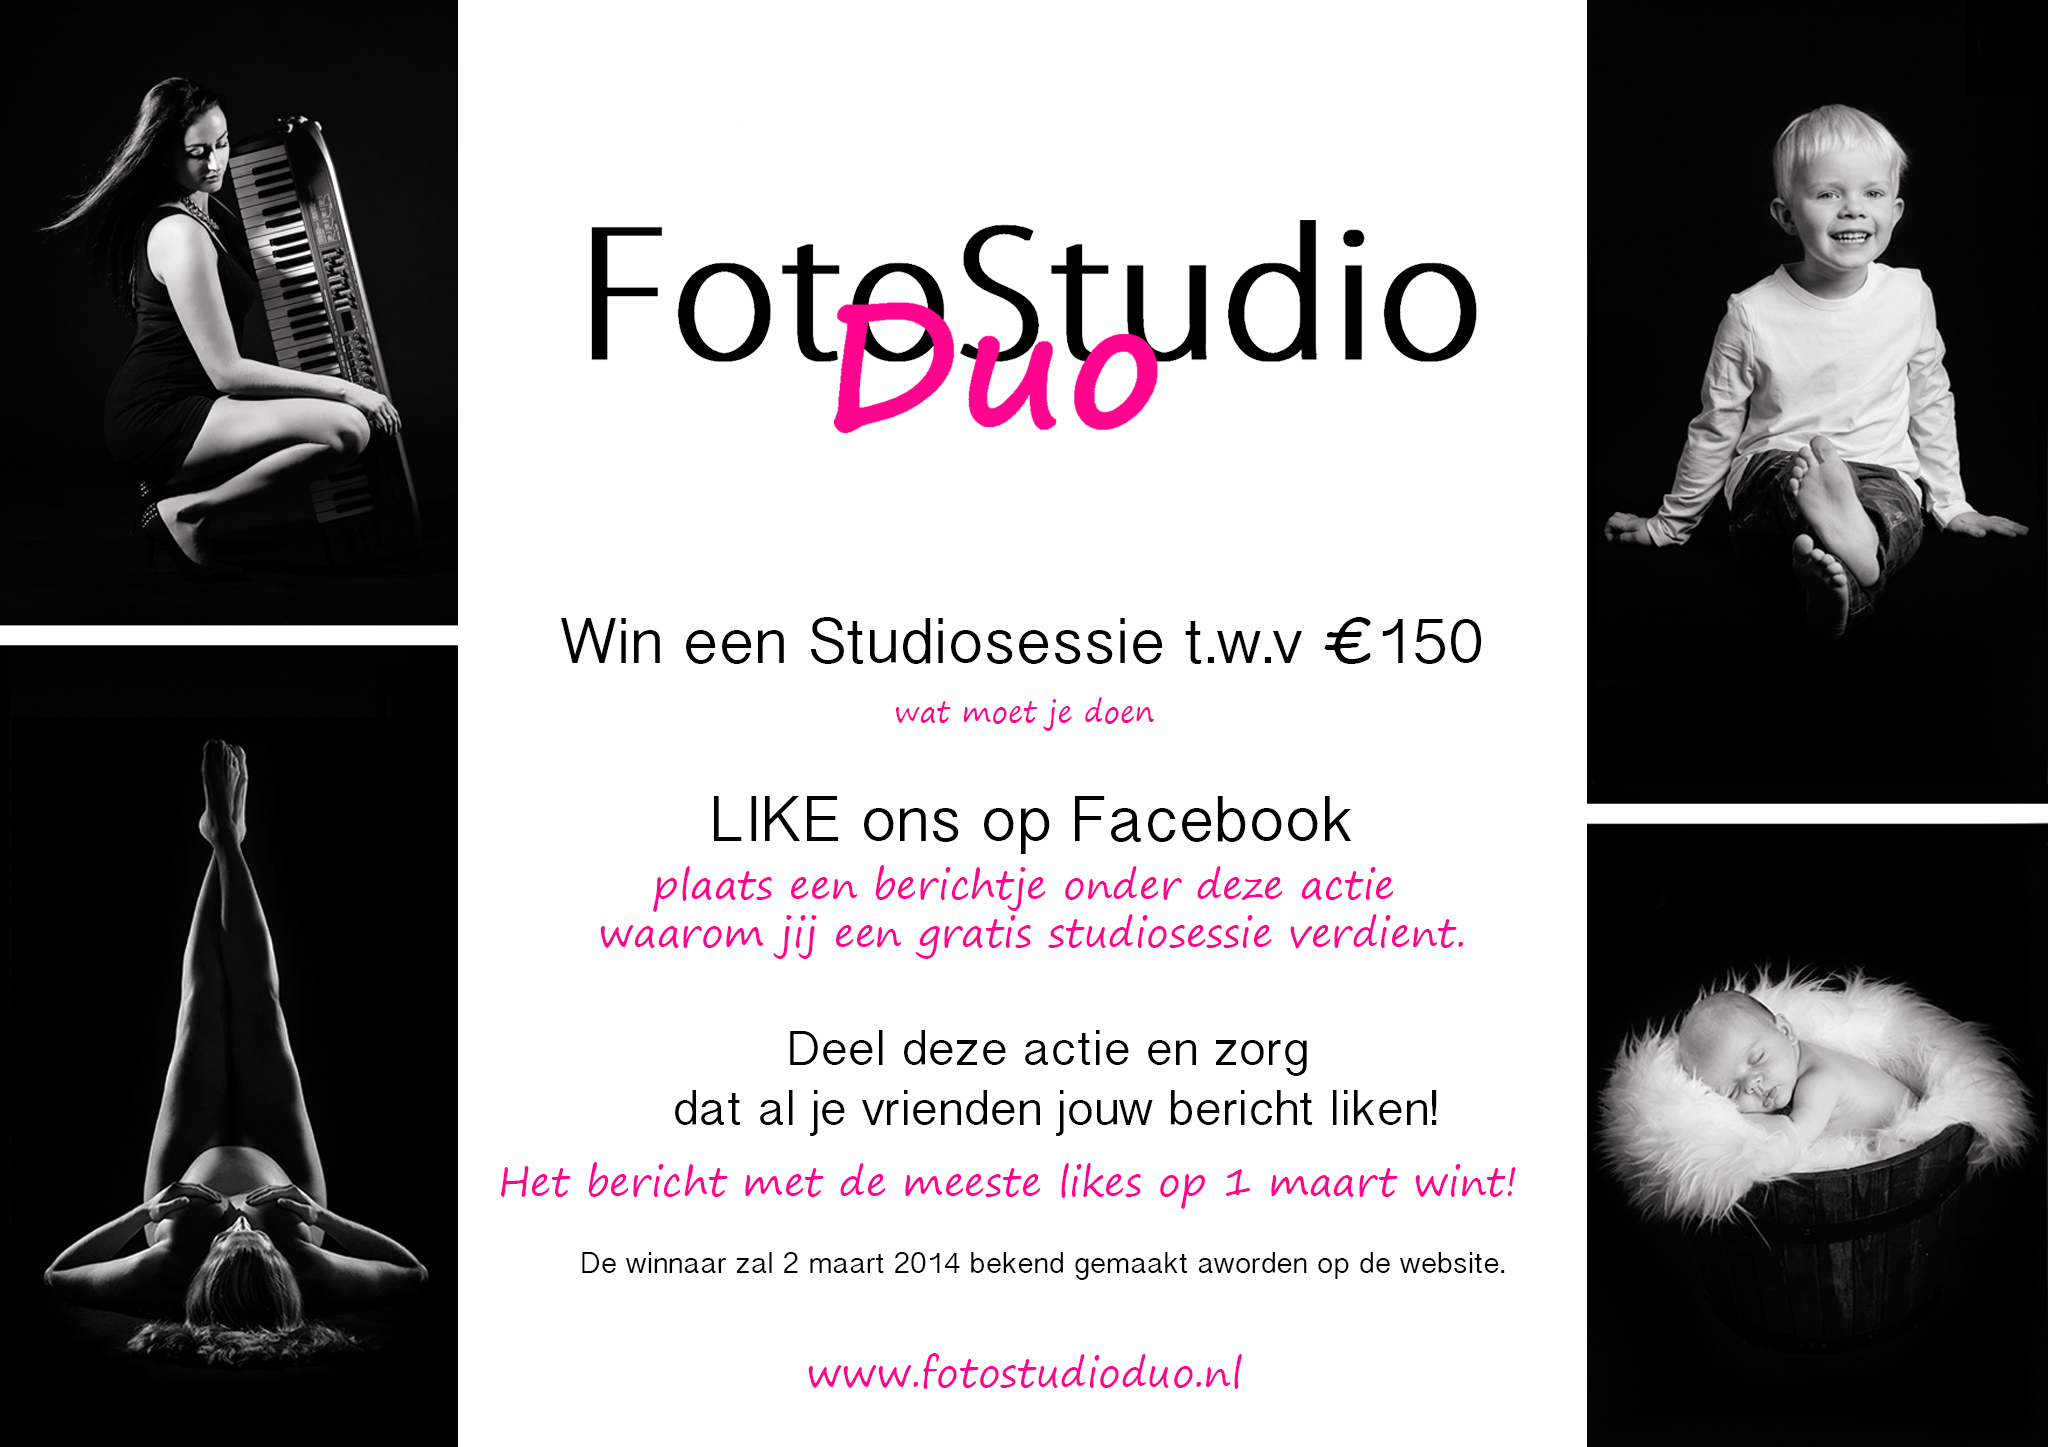 http://www.fotostudioduo.nl/wp-admin/post-new.php?post_type=page#